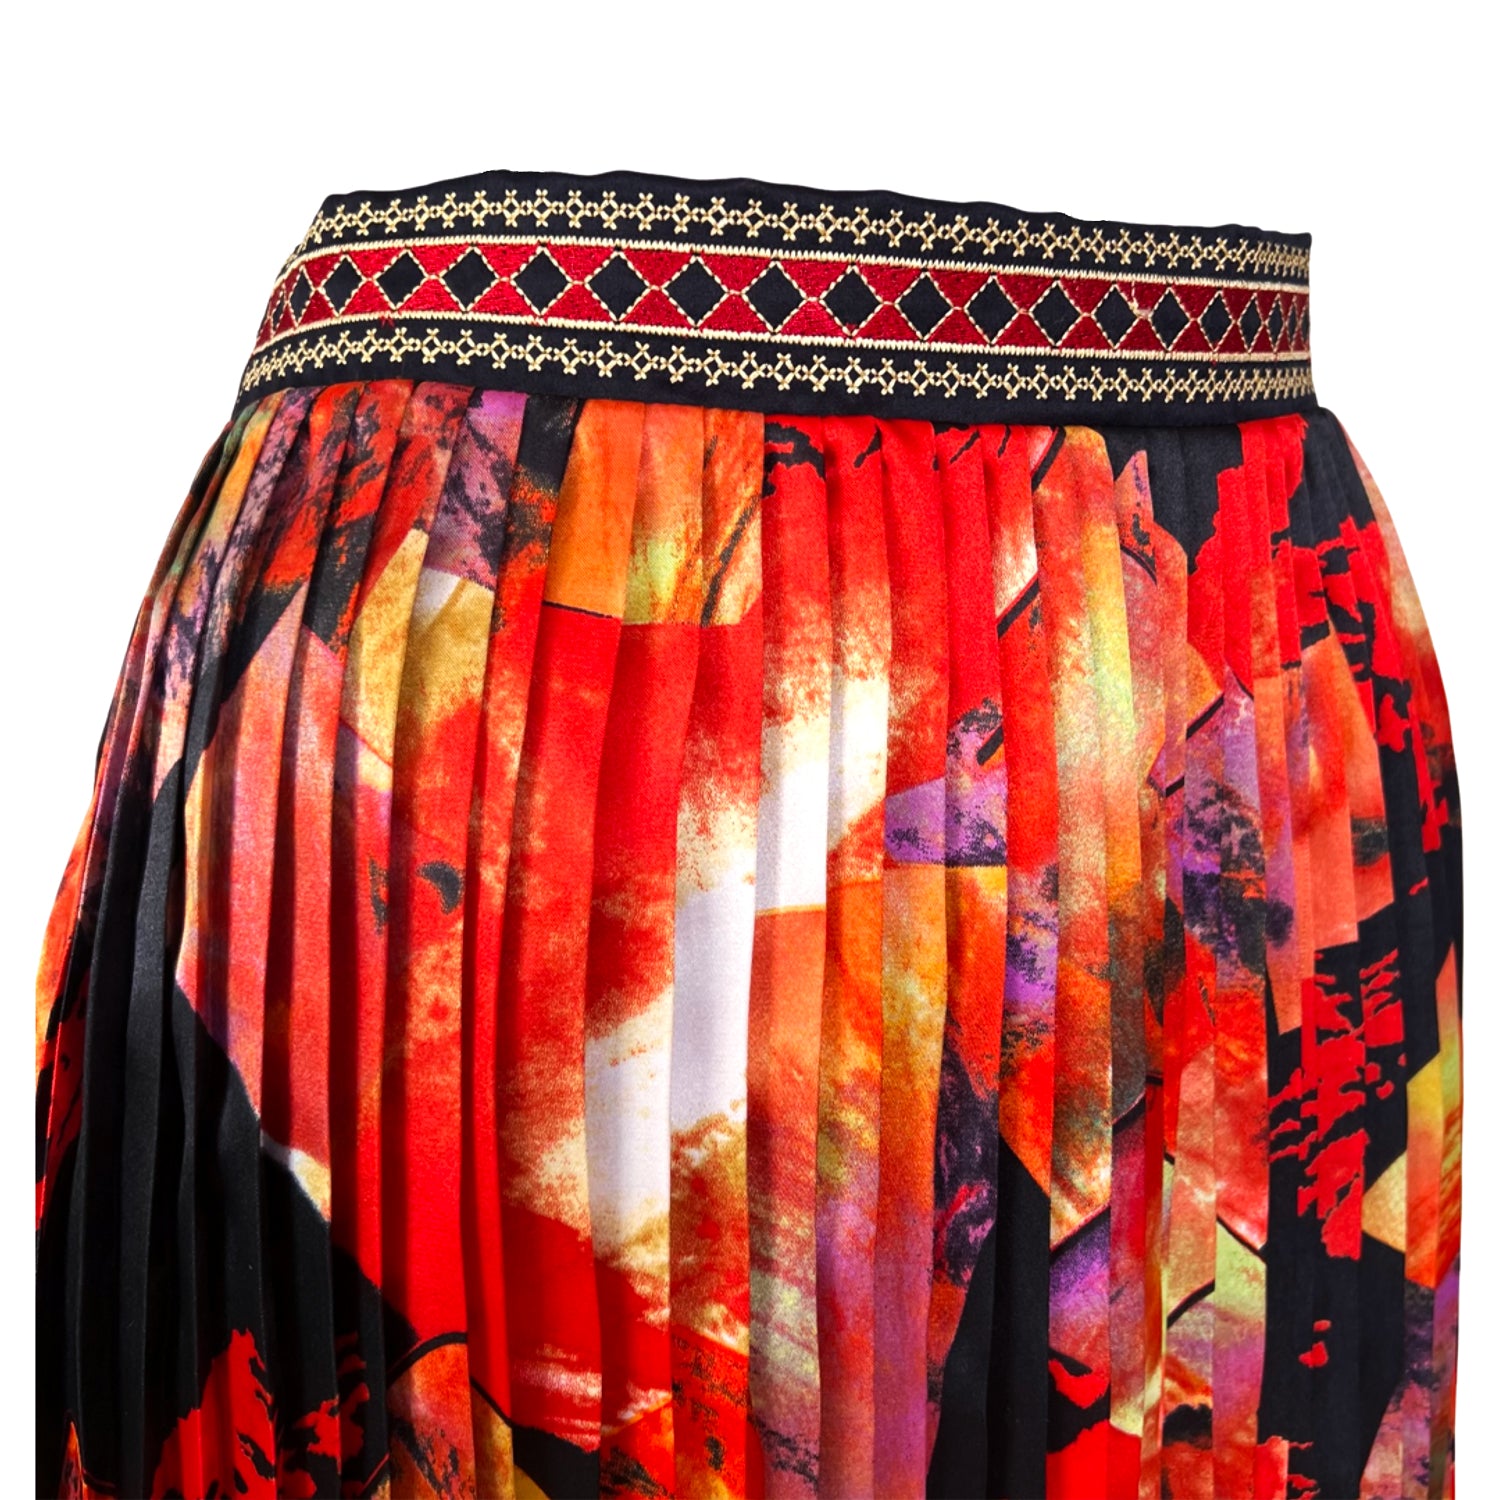 Embroidered Pleated Midi Skirt in Abstract Red